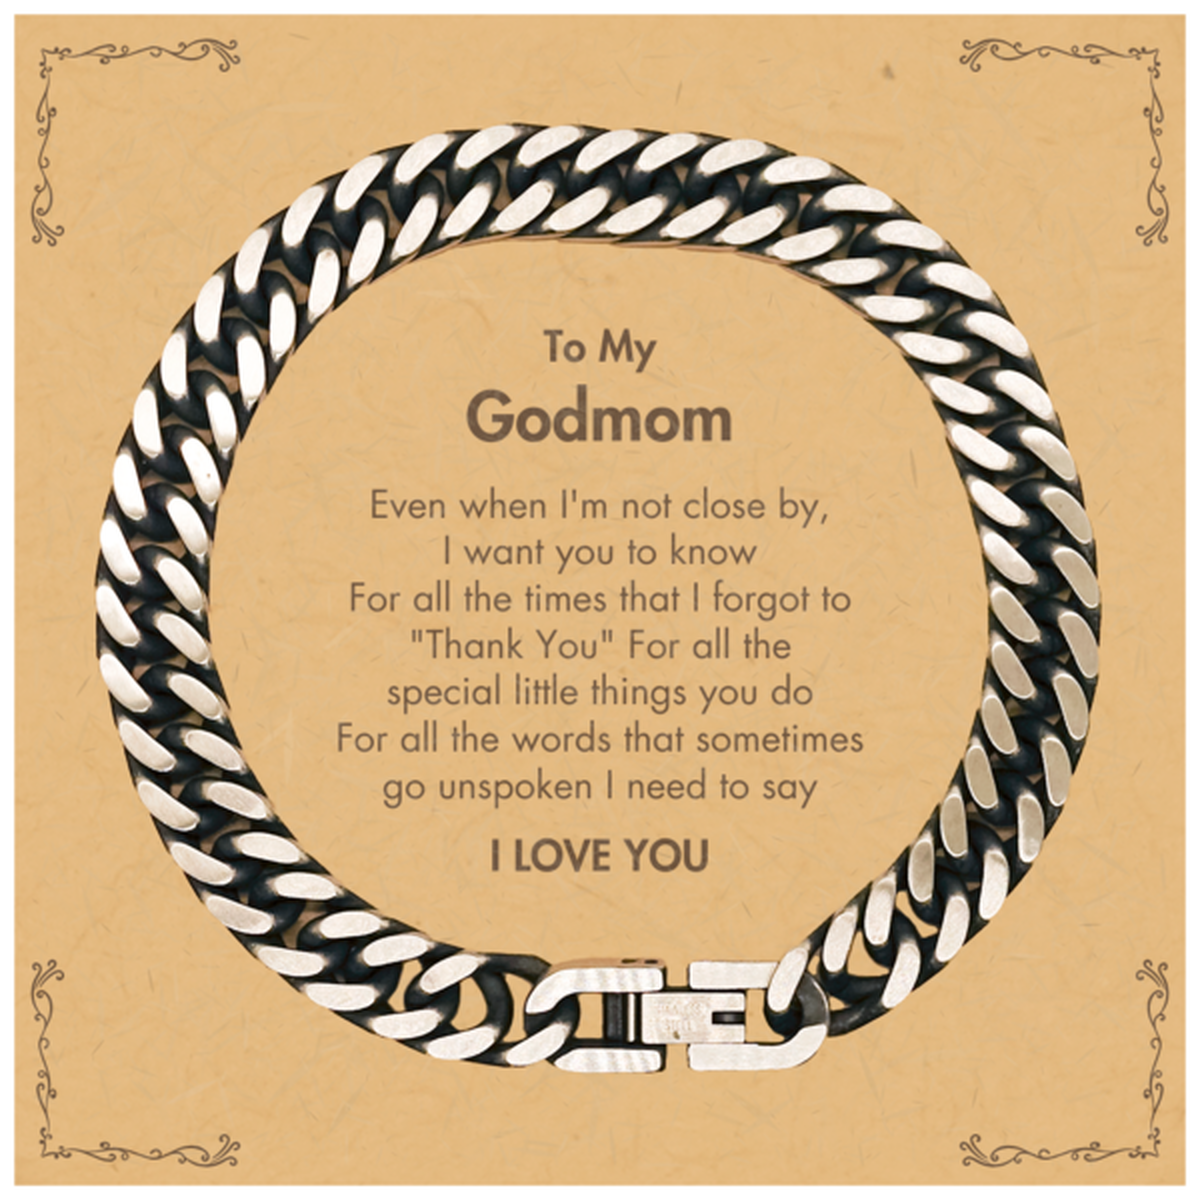 Thank You Gifts for Godmom, Keepsake Cuban Link Chain Bracelet Gifts for Godmom Birthday Mother's day Father's Day Godmom For all the words That sometimes go unspoken I need to say I LOVE YOU